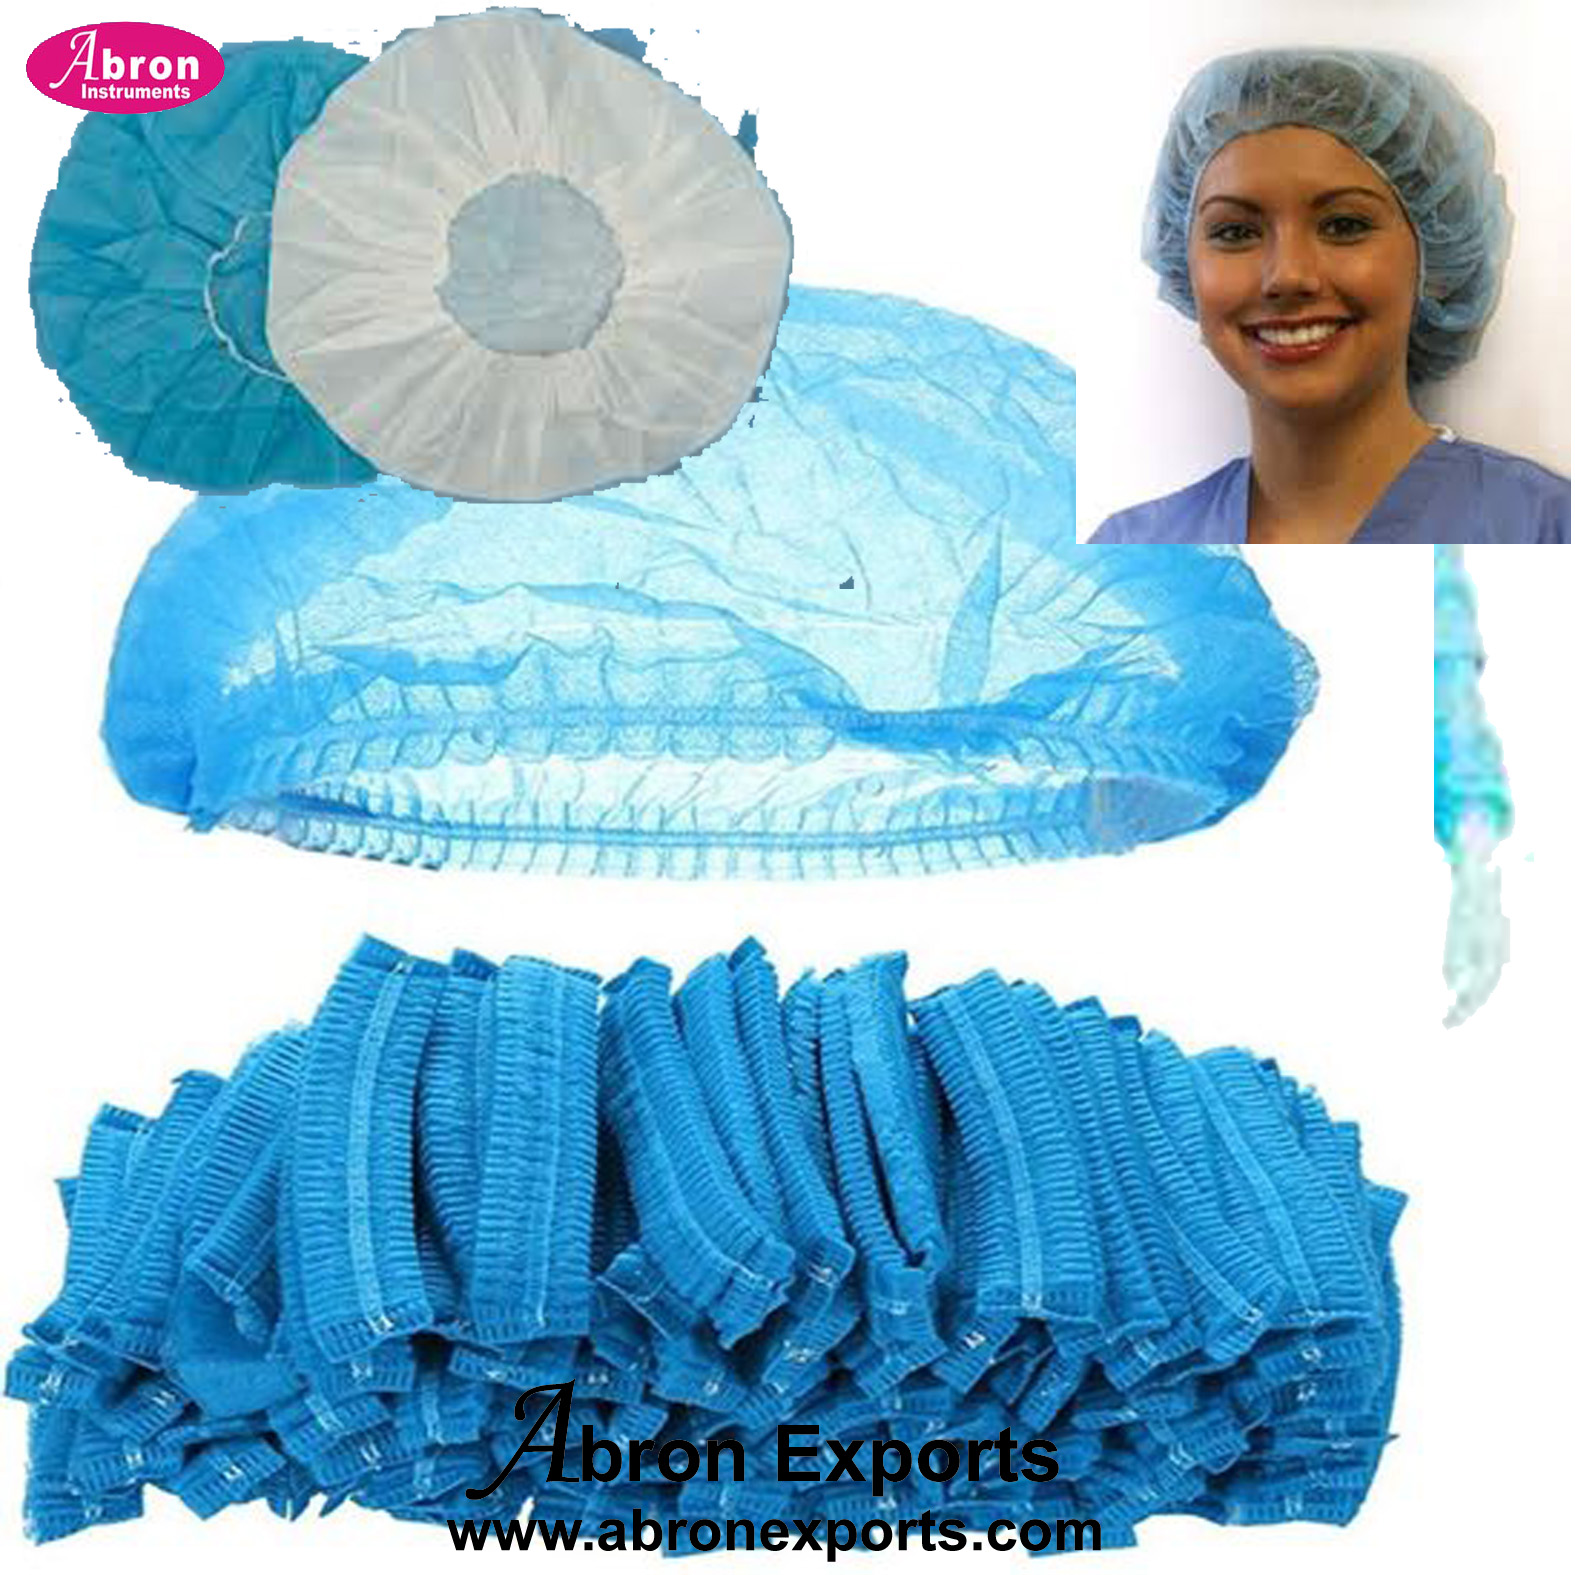 Disposable bouffant cap non woven white for Medical hospital surgical or pharma lab pack of 100 abron ABM-2651BCW